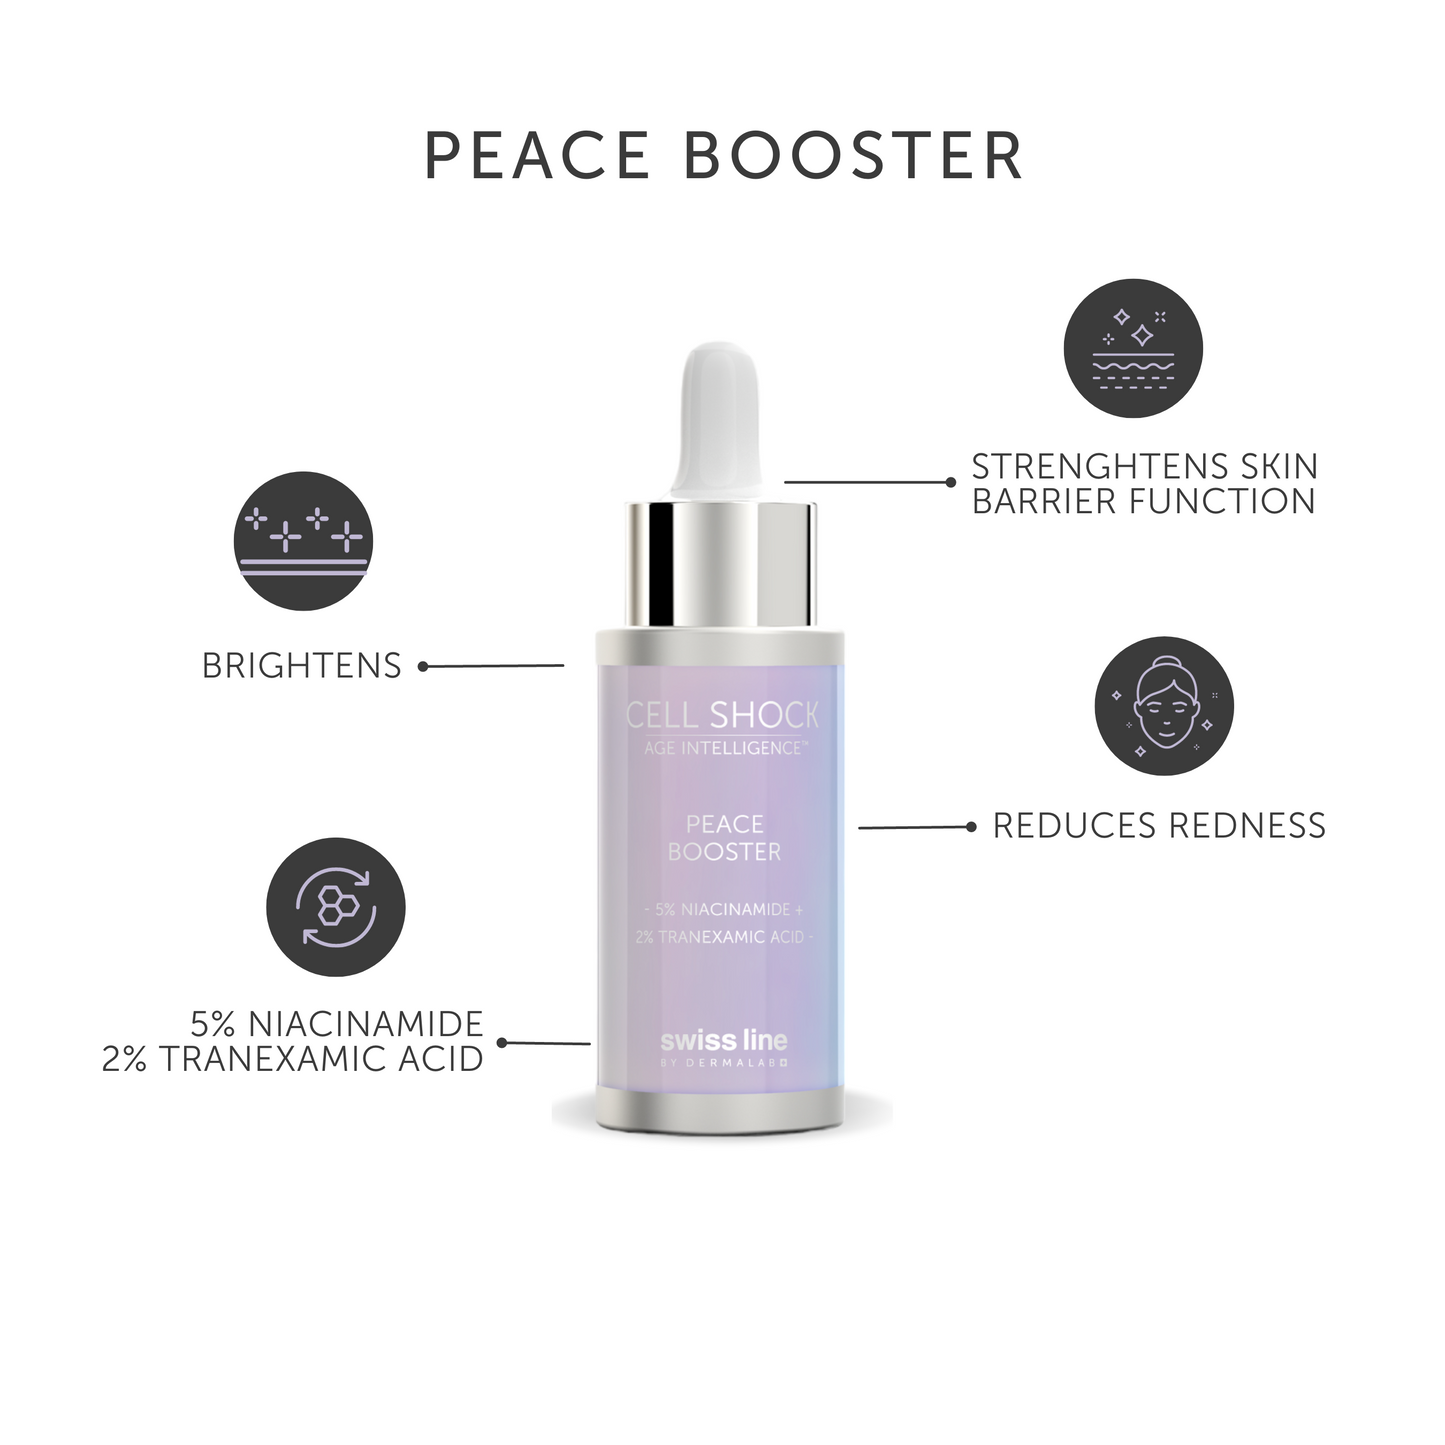 Cell Shock Age Intelligence Peace Booster (20ml)